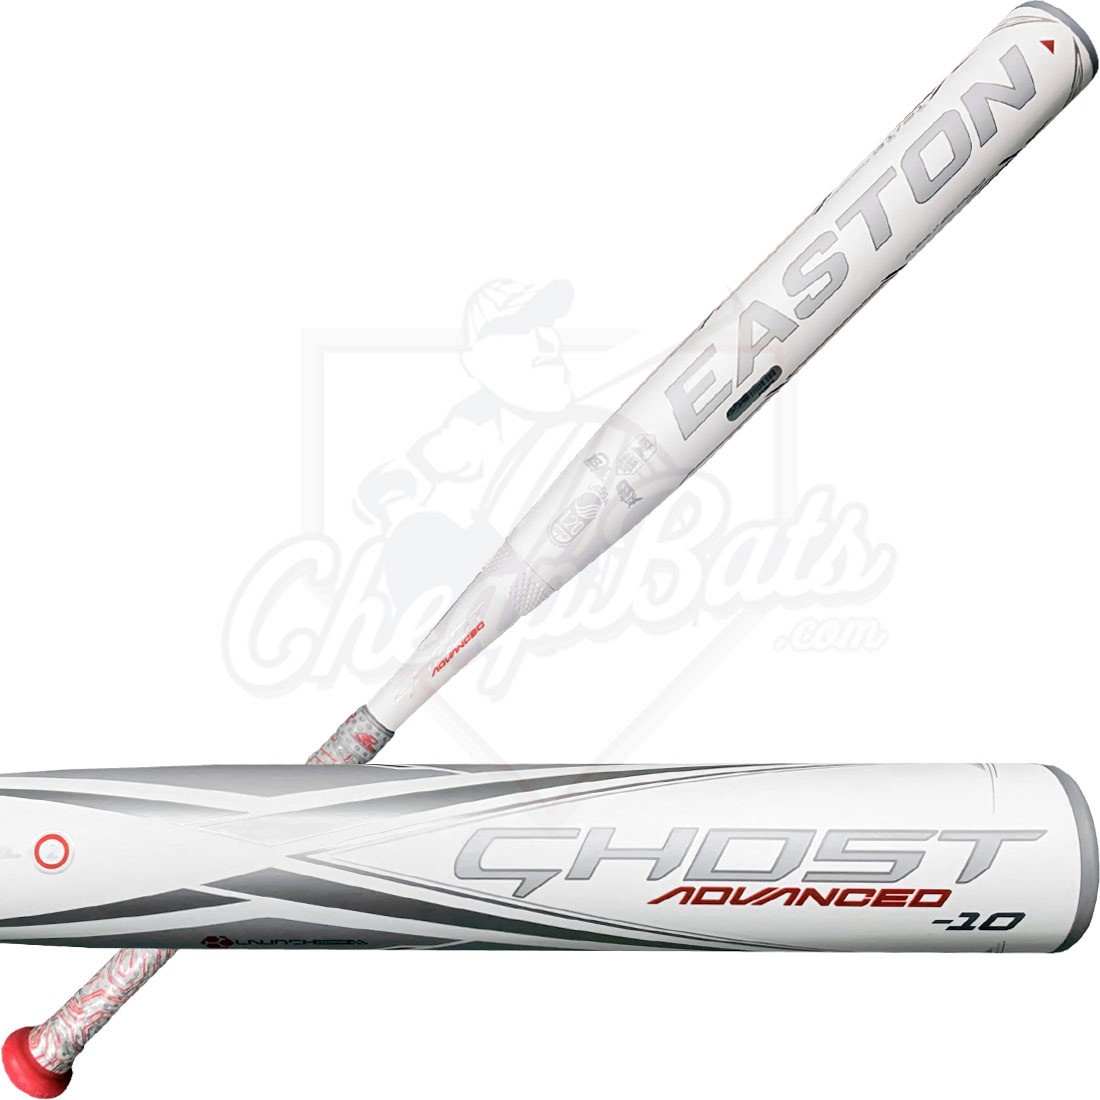 New EASTON GHOST YOUTH FASTPITCH BAT Fastpitch Bats